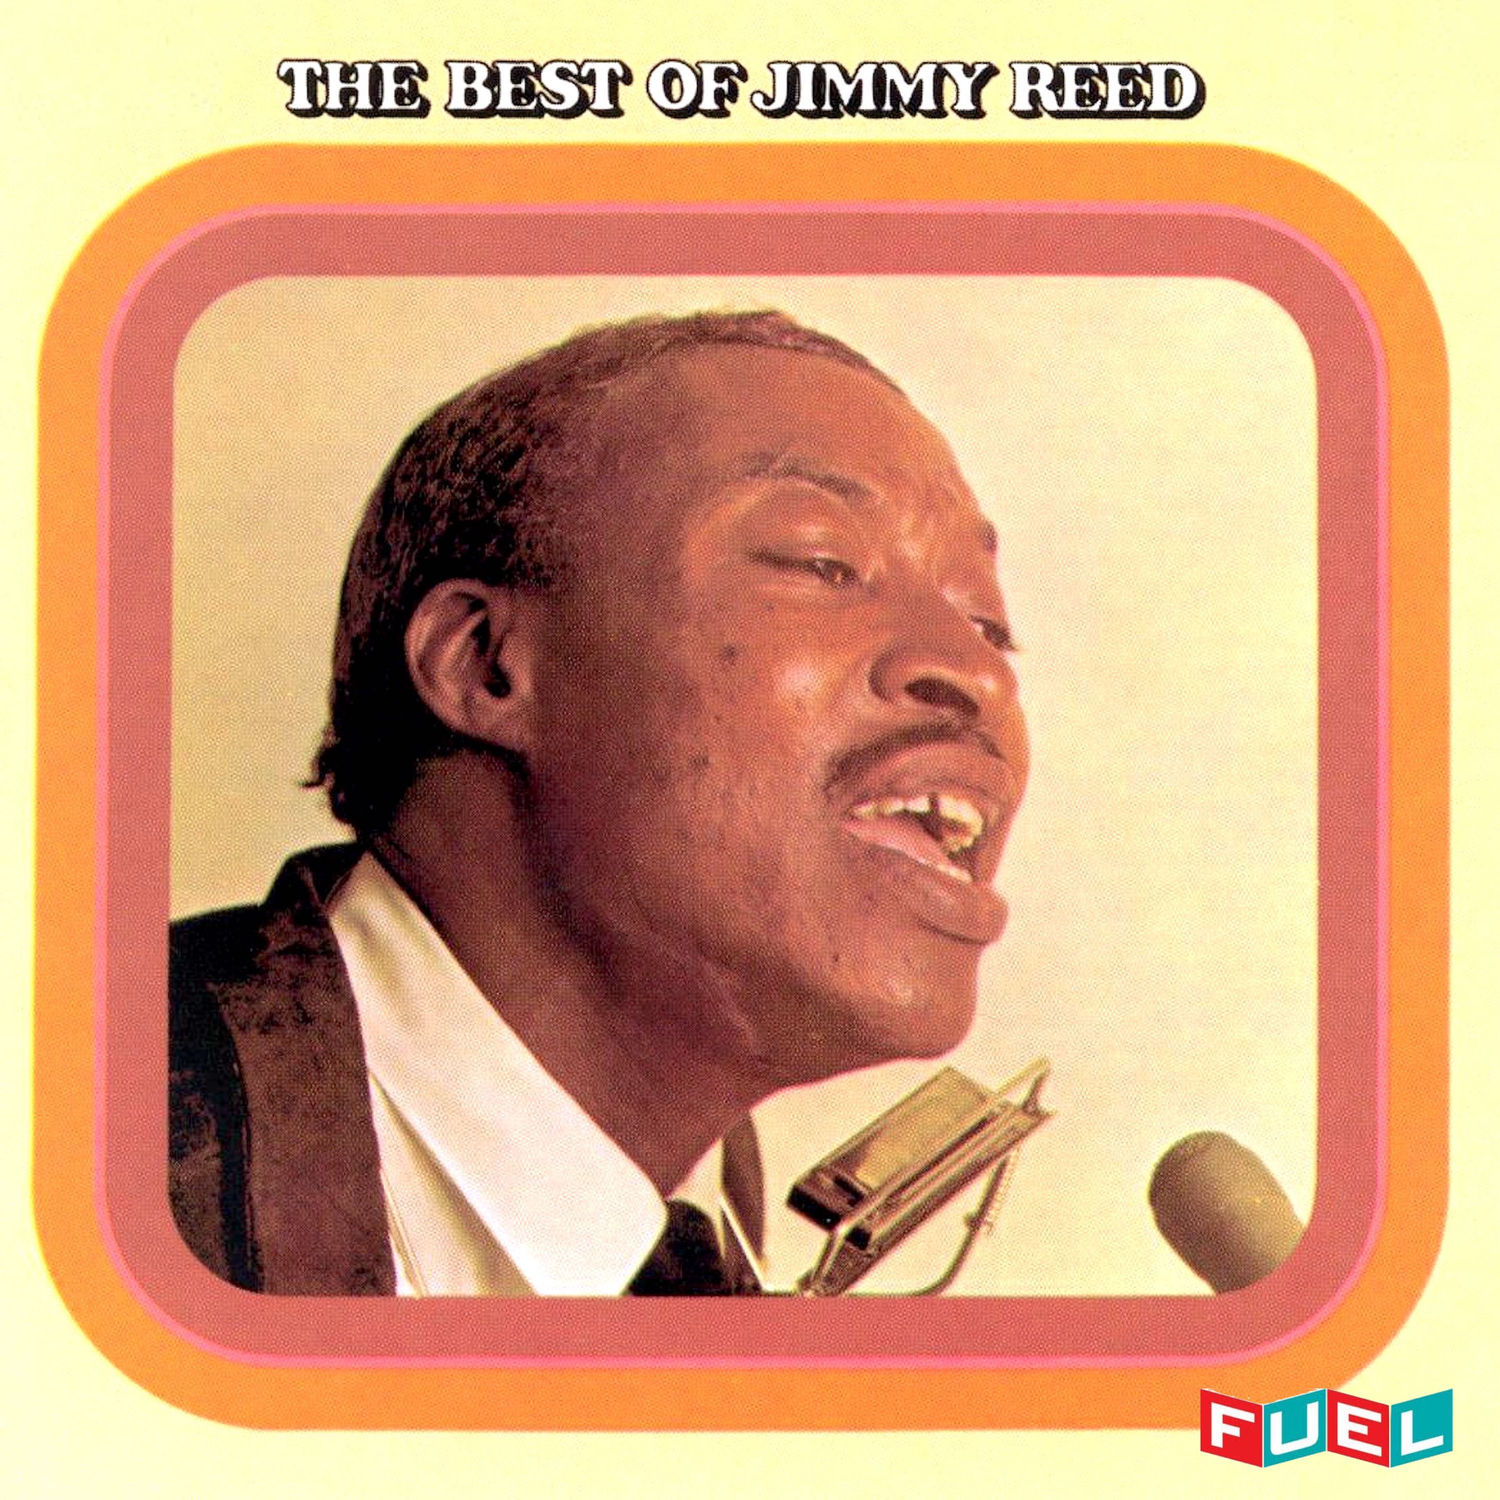 The Best of Jimmy Reed